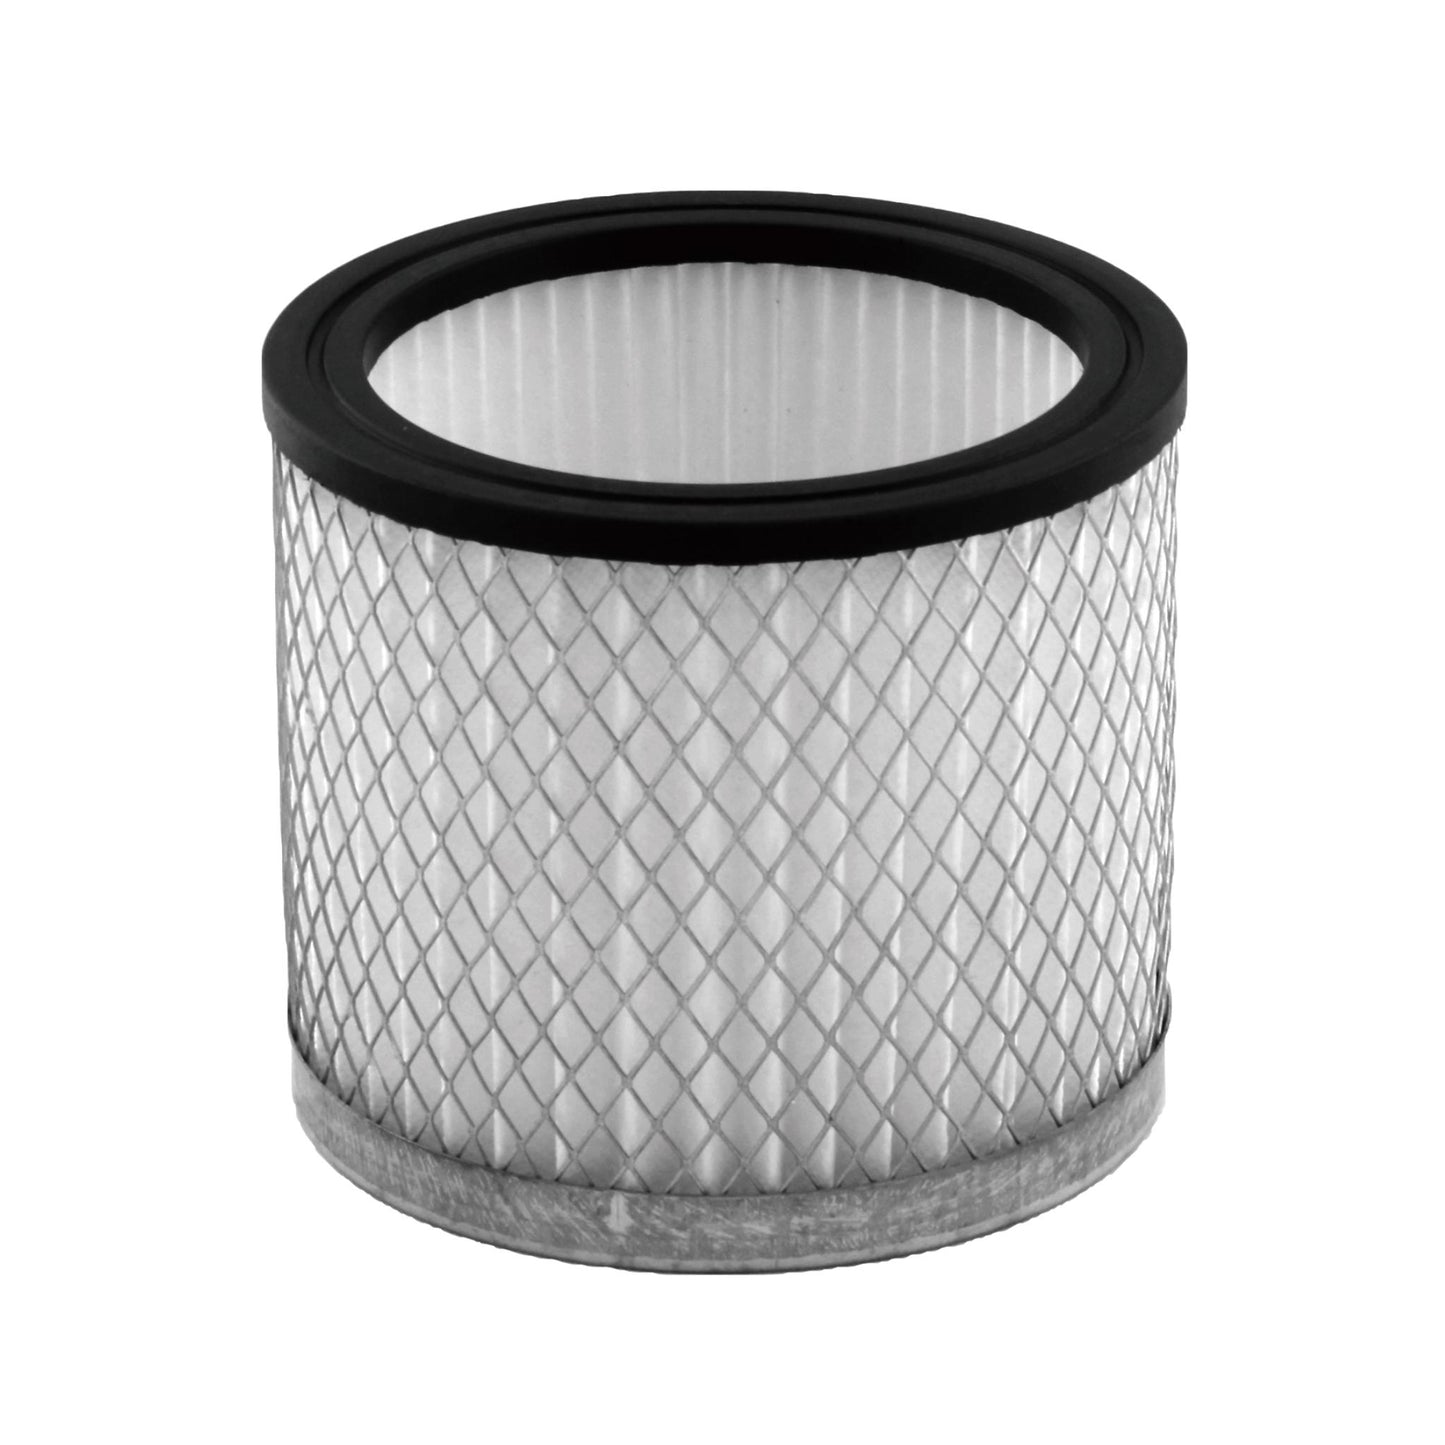 Replacement Filter for 120V Ash Vac - WPPO LLC Direct